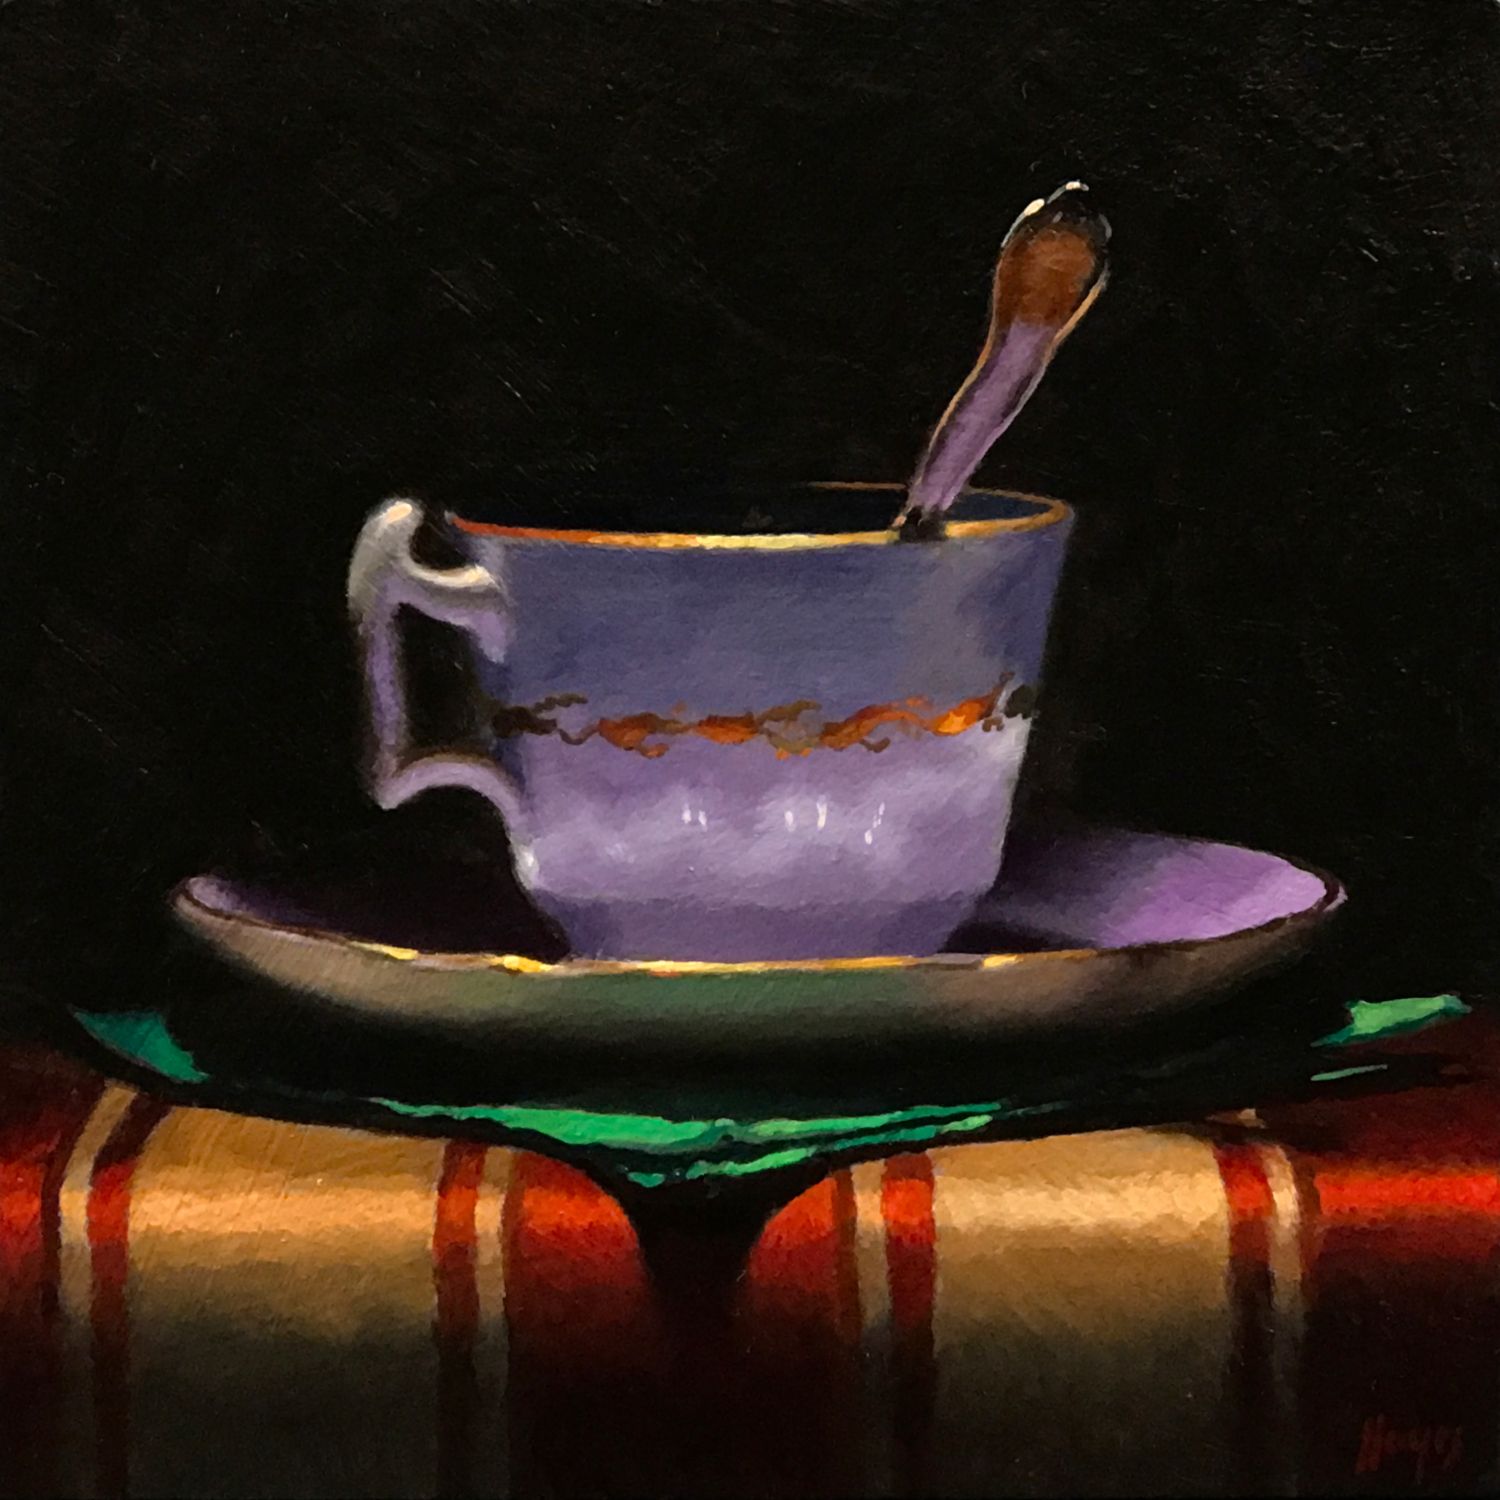 "Teacup, Green Napkin, Striped Cloth"
oil on panel, 5x5 inches